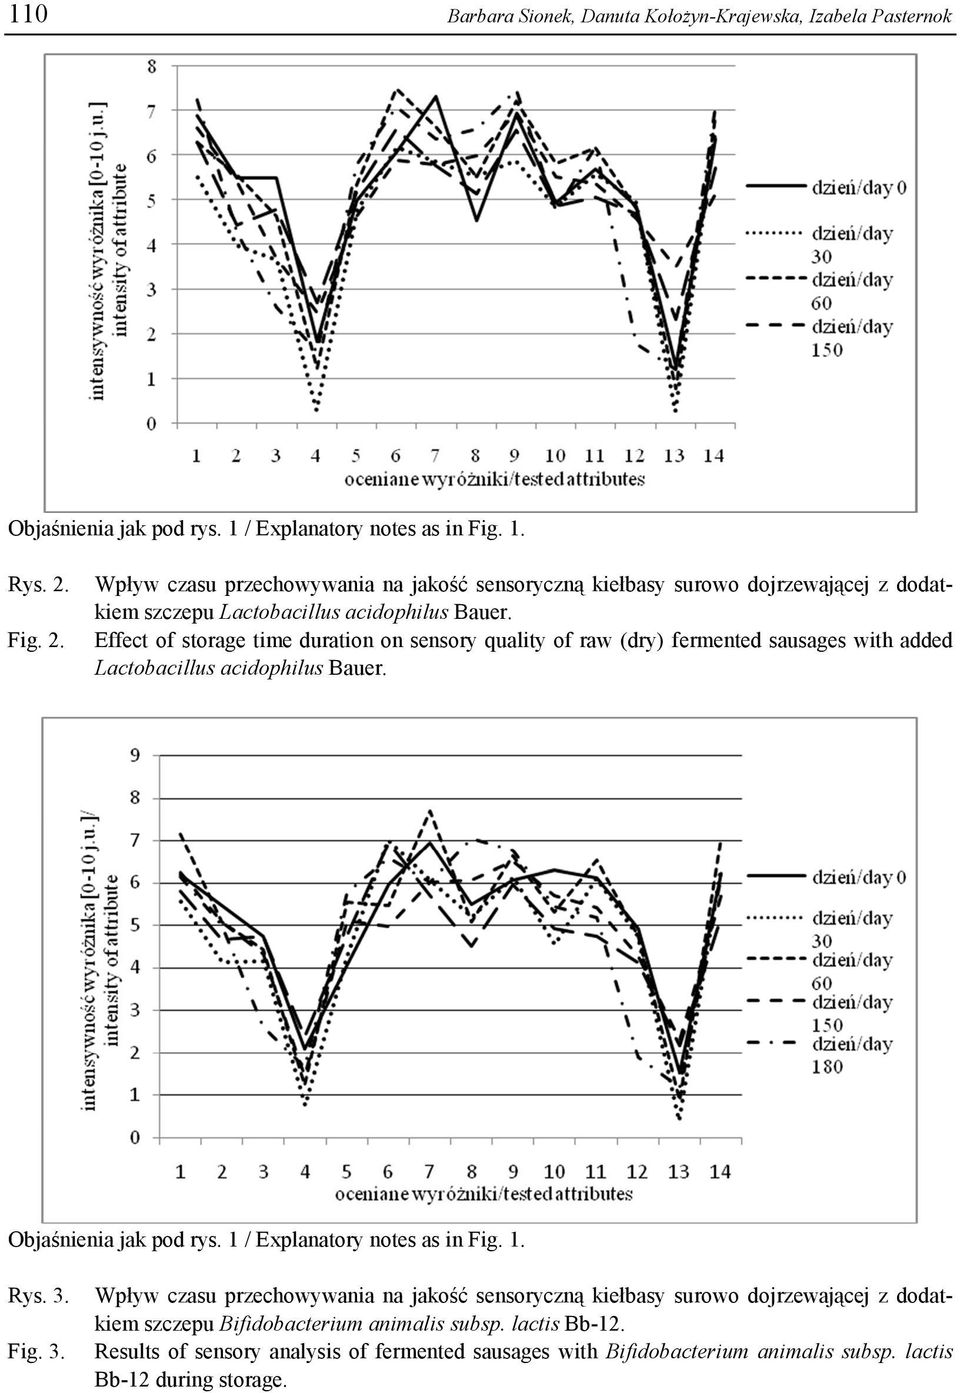 Effect of storage time duration on sensory quality of raw (dry) fermented sausages with added Lactobacillus acidophilus Bauer. Objaśnienia jak pod rys. 1 / Explanatory notes as in Fig.